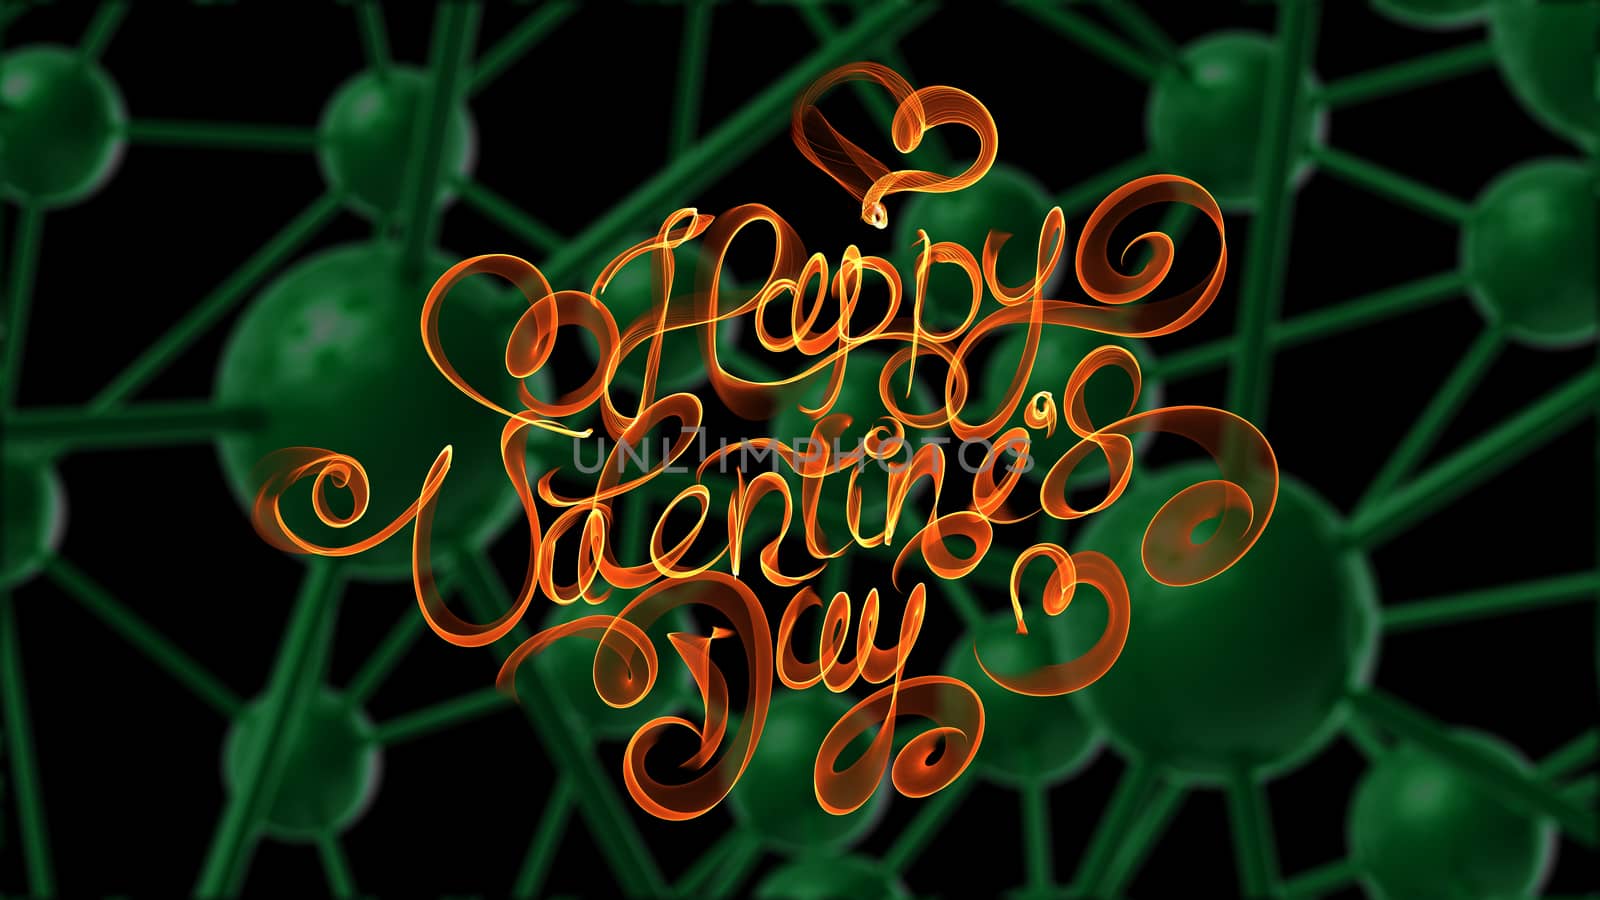 Happy Valentines day vintage lettering written by fire or orange smoke over green molecular background. 3d illustration.